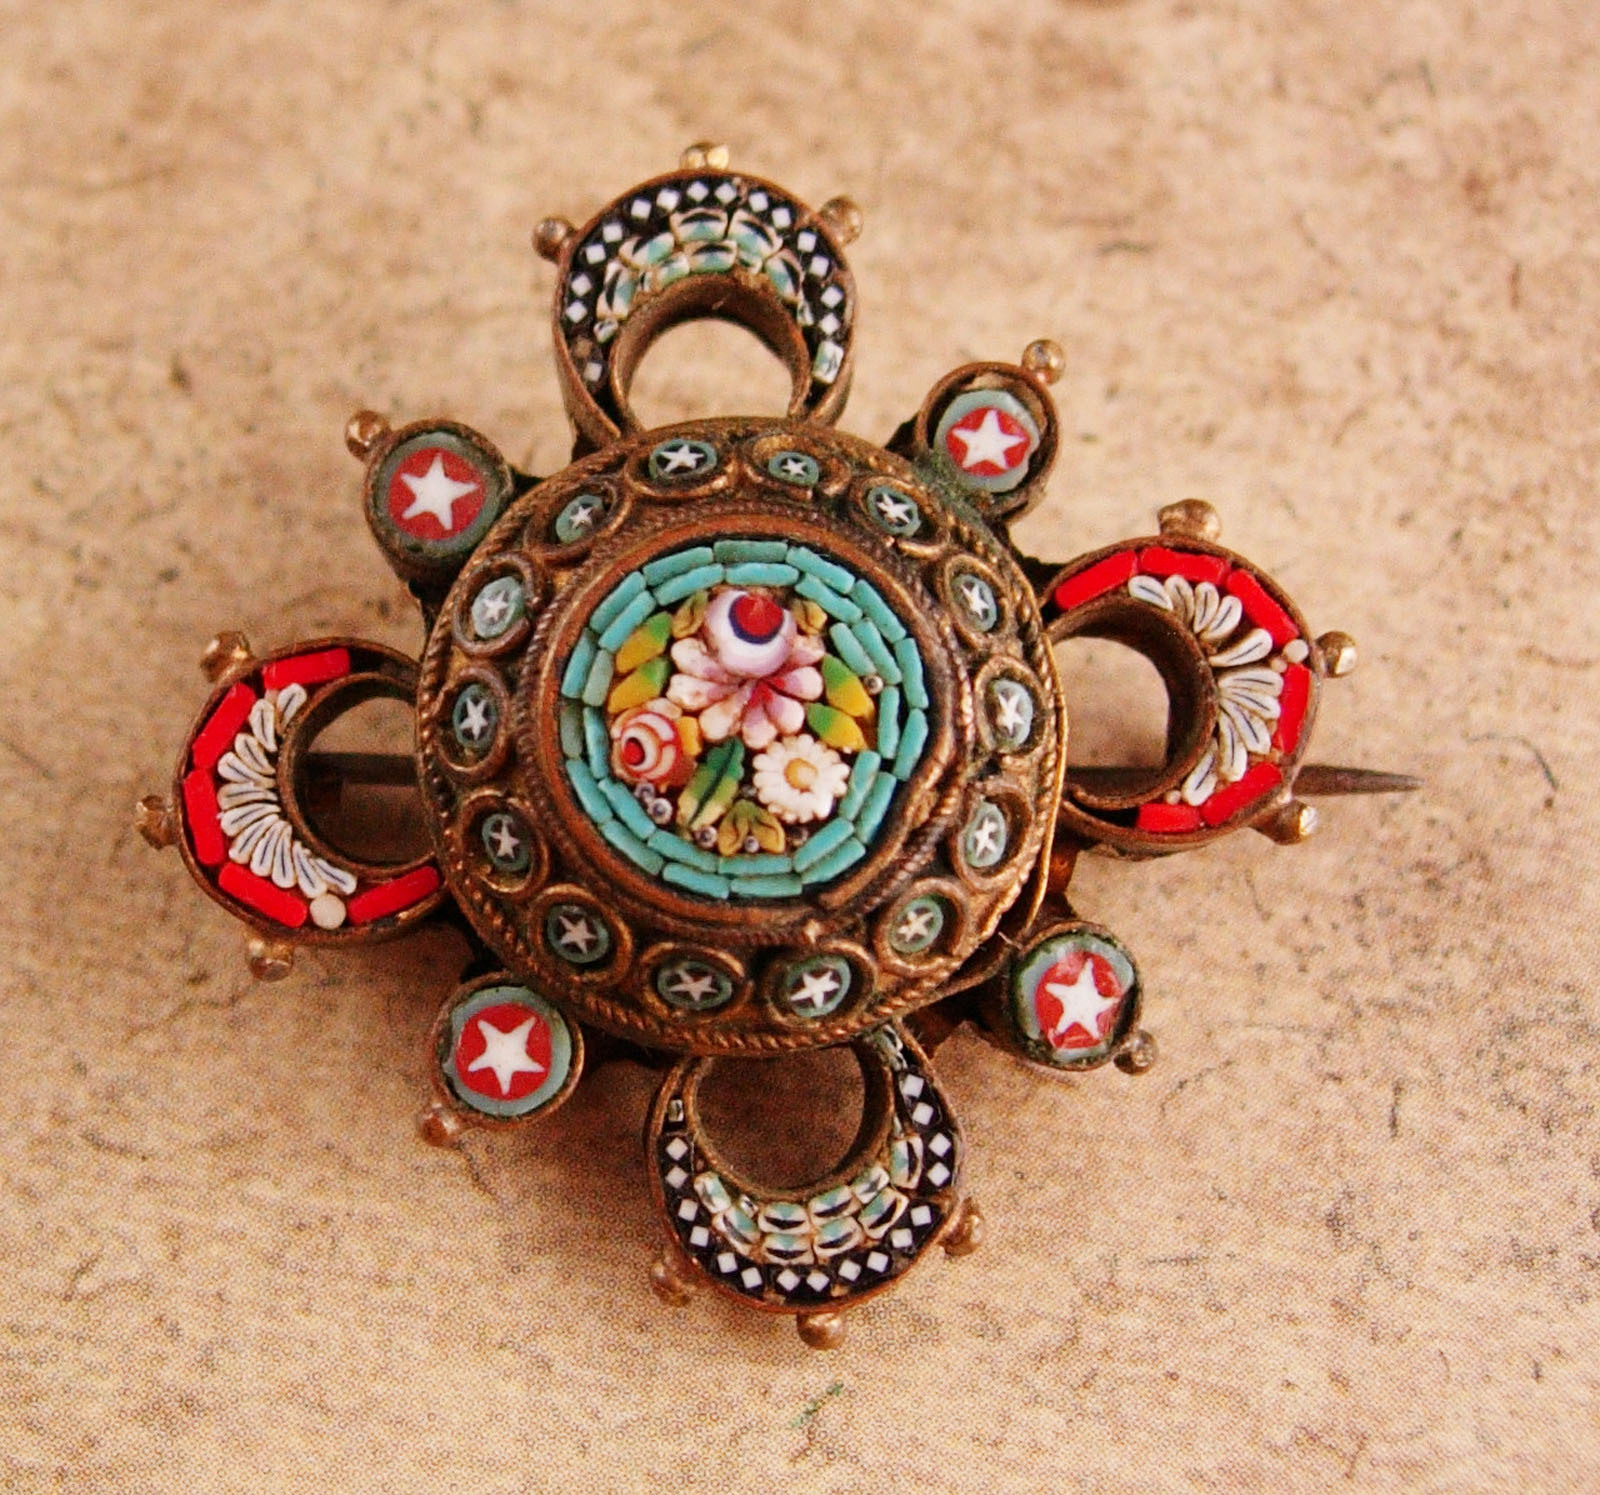 Primary image for rare Antique micromosaic brooch - Tiny stars - Victorian flower dome cross pin -